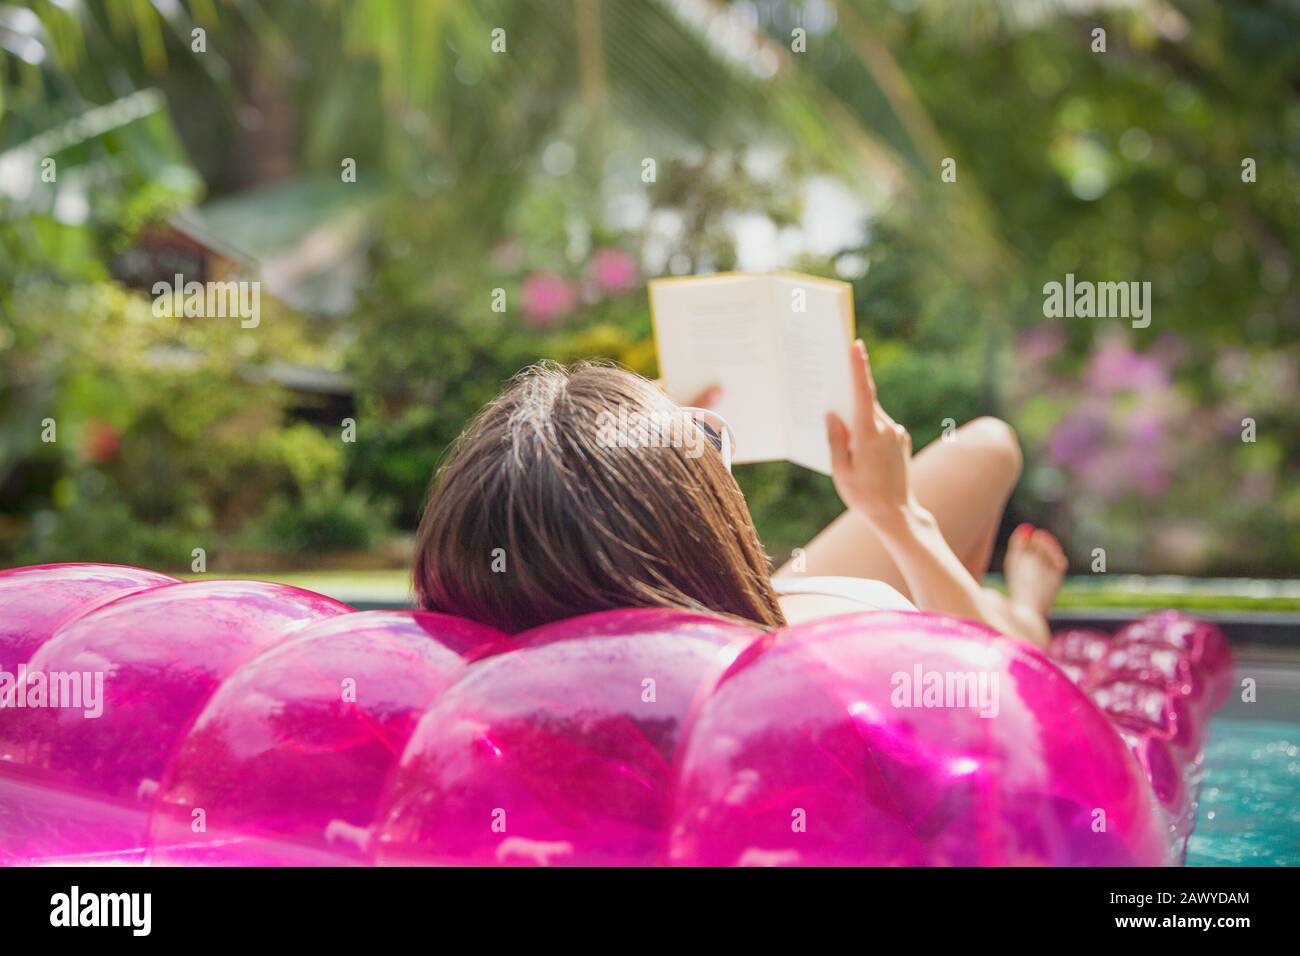 Woman relaxing, reading book on inflatable raft in swimming pool Stock Photo